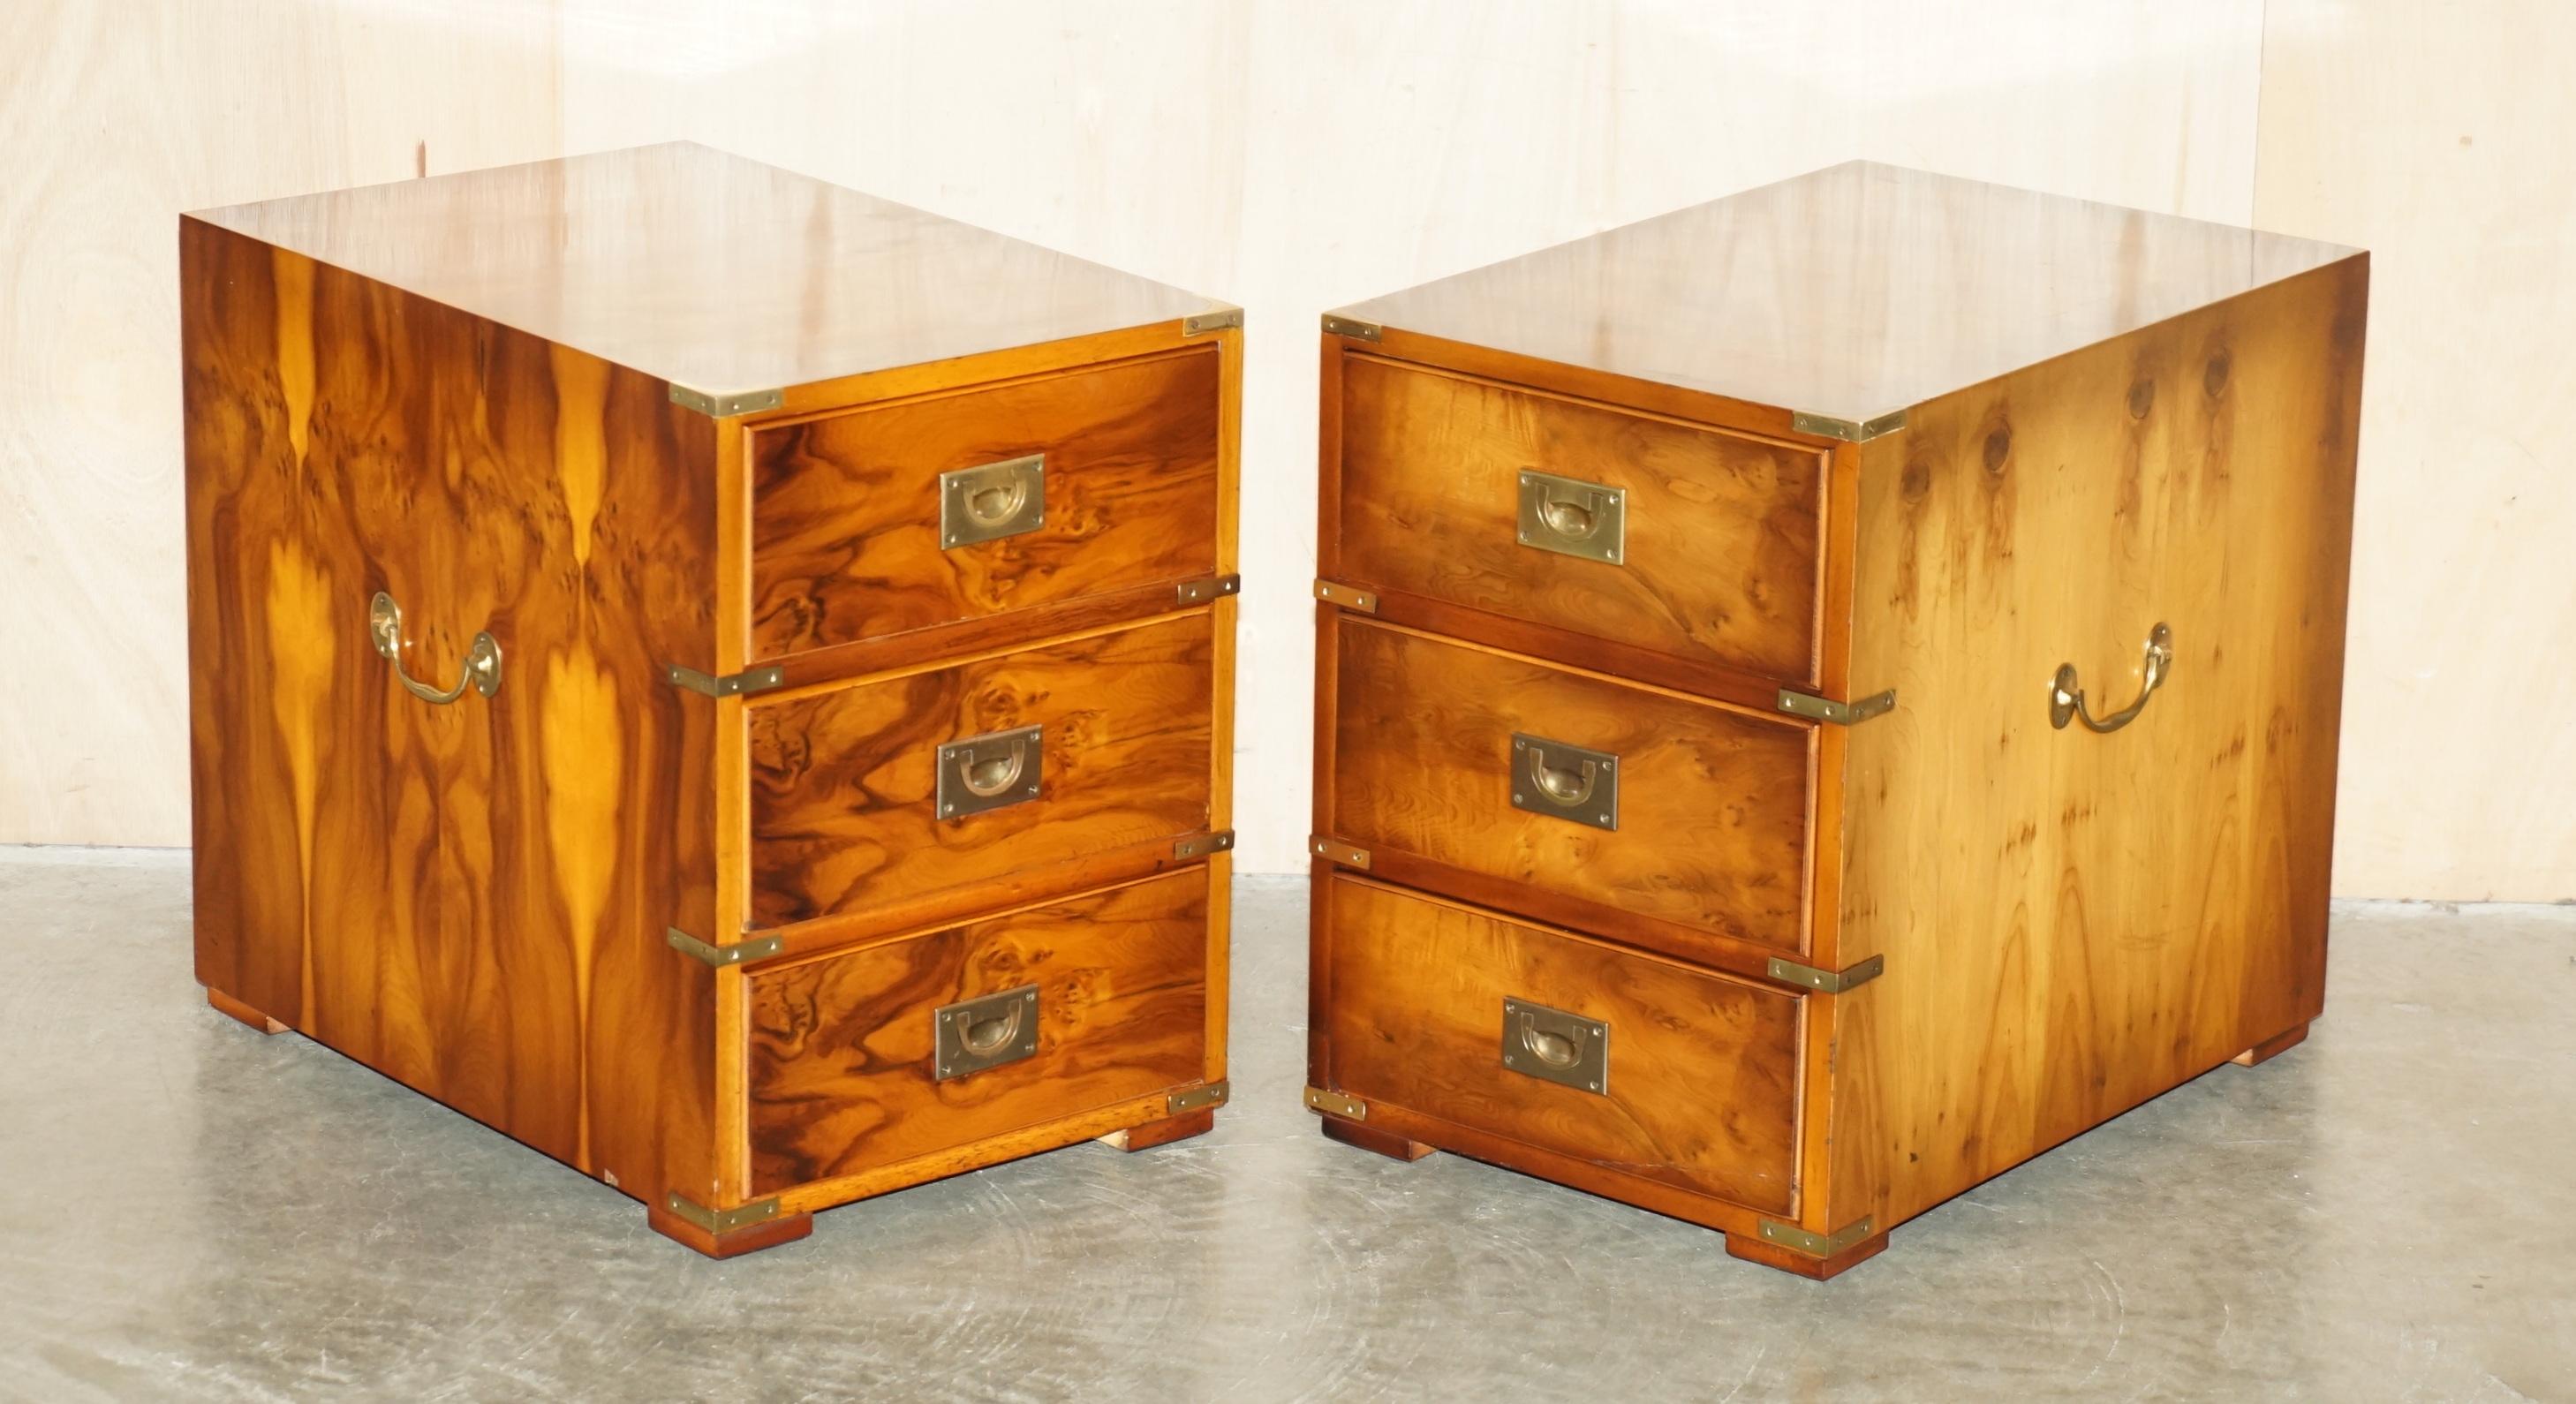 Royal House Antiques

Royal House Antiques is delighted to offer for sale this lovely pair of vintage Burr Yew wood & brass mounted Military Campaign style side tables which are much larger than usual 

Please note the delivery fee listed is just a